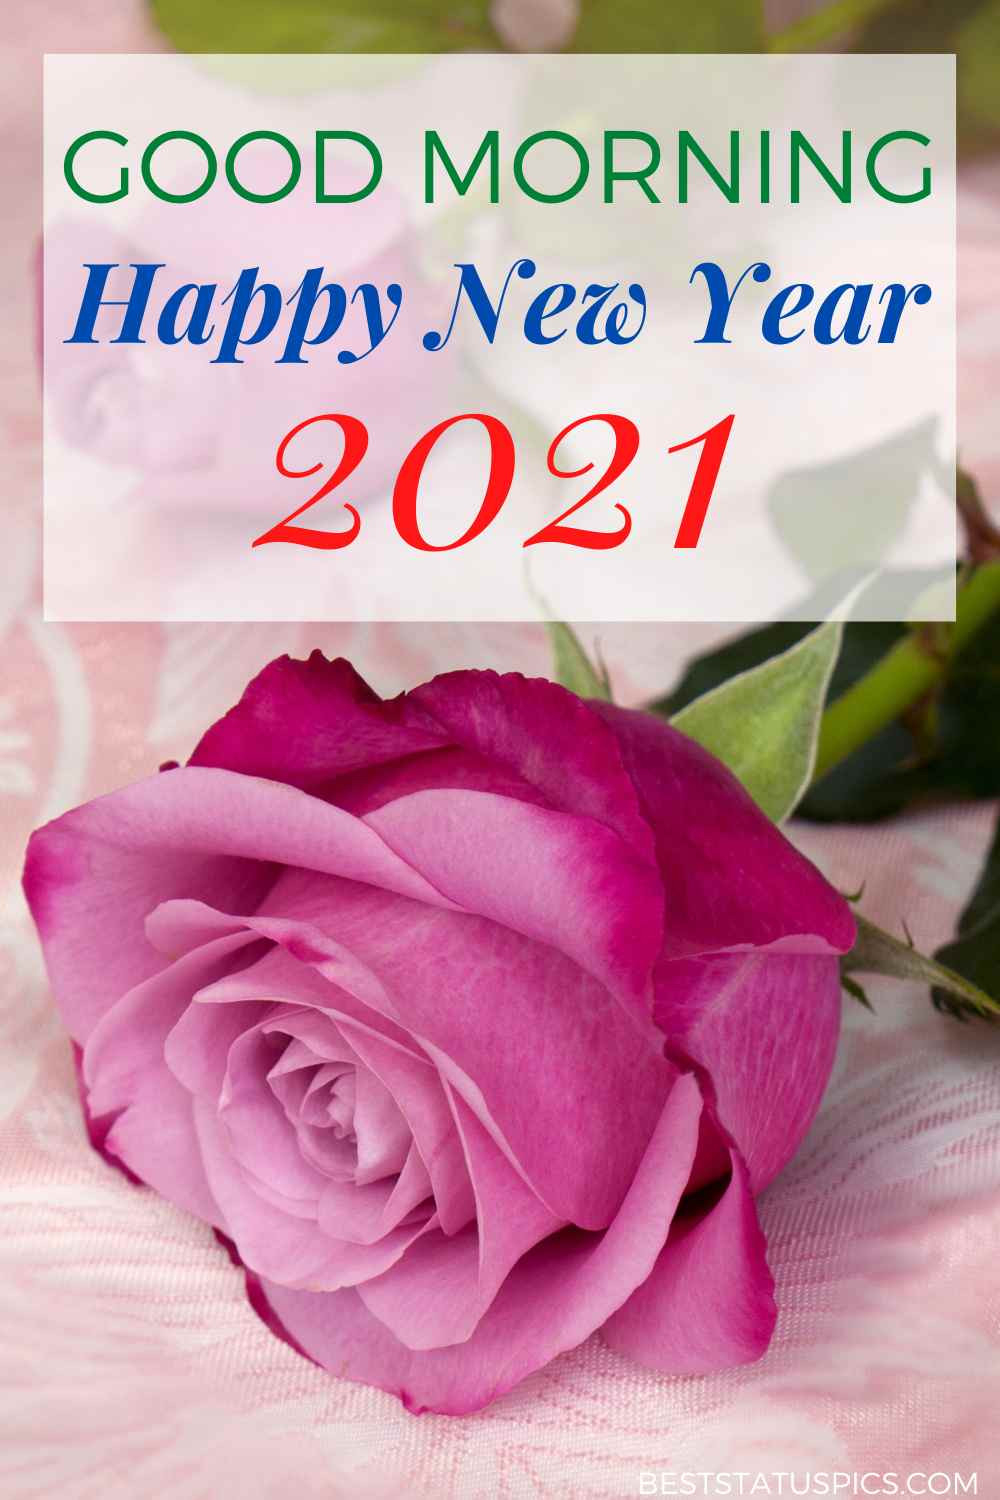 51+ Good Morning Happy New Year 2021 Wishes Images Hd | Best Status Pics-Will 2021 Be A Good Year